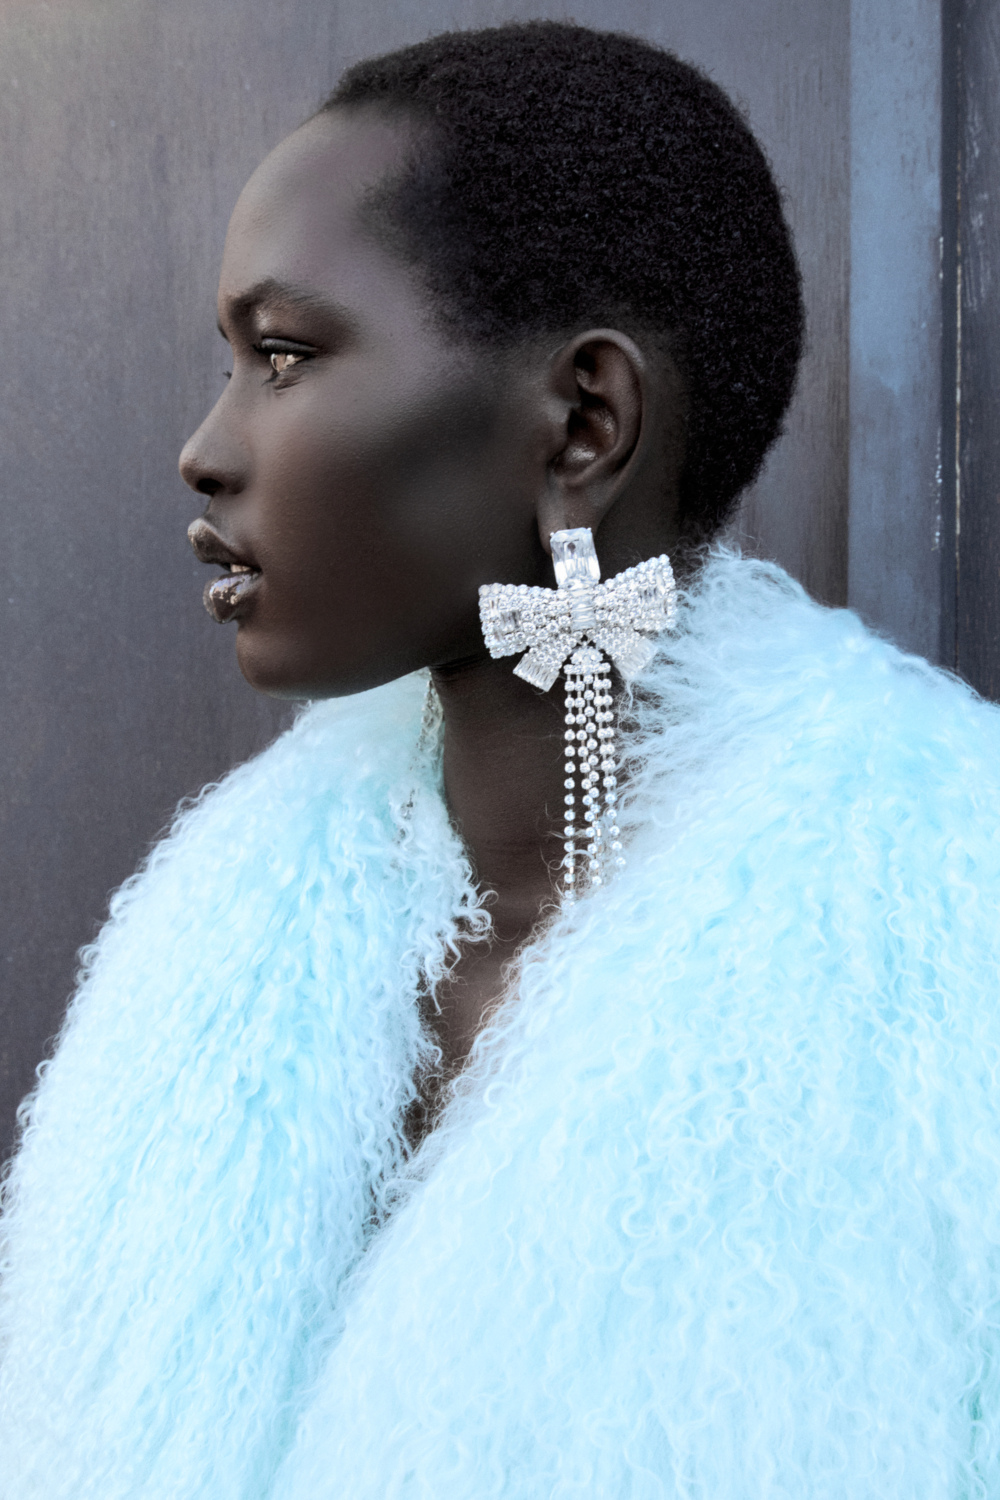 Self-Portrait Makes Its Jewellery Debut – And, As Expected, It's Stunning